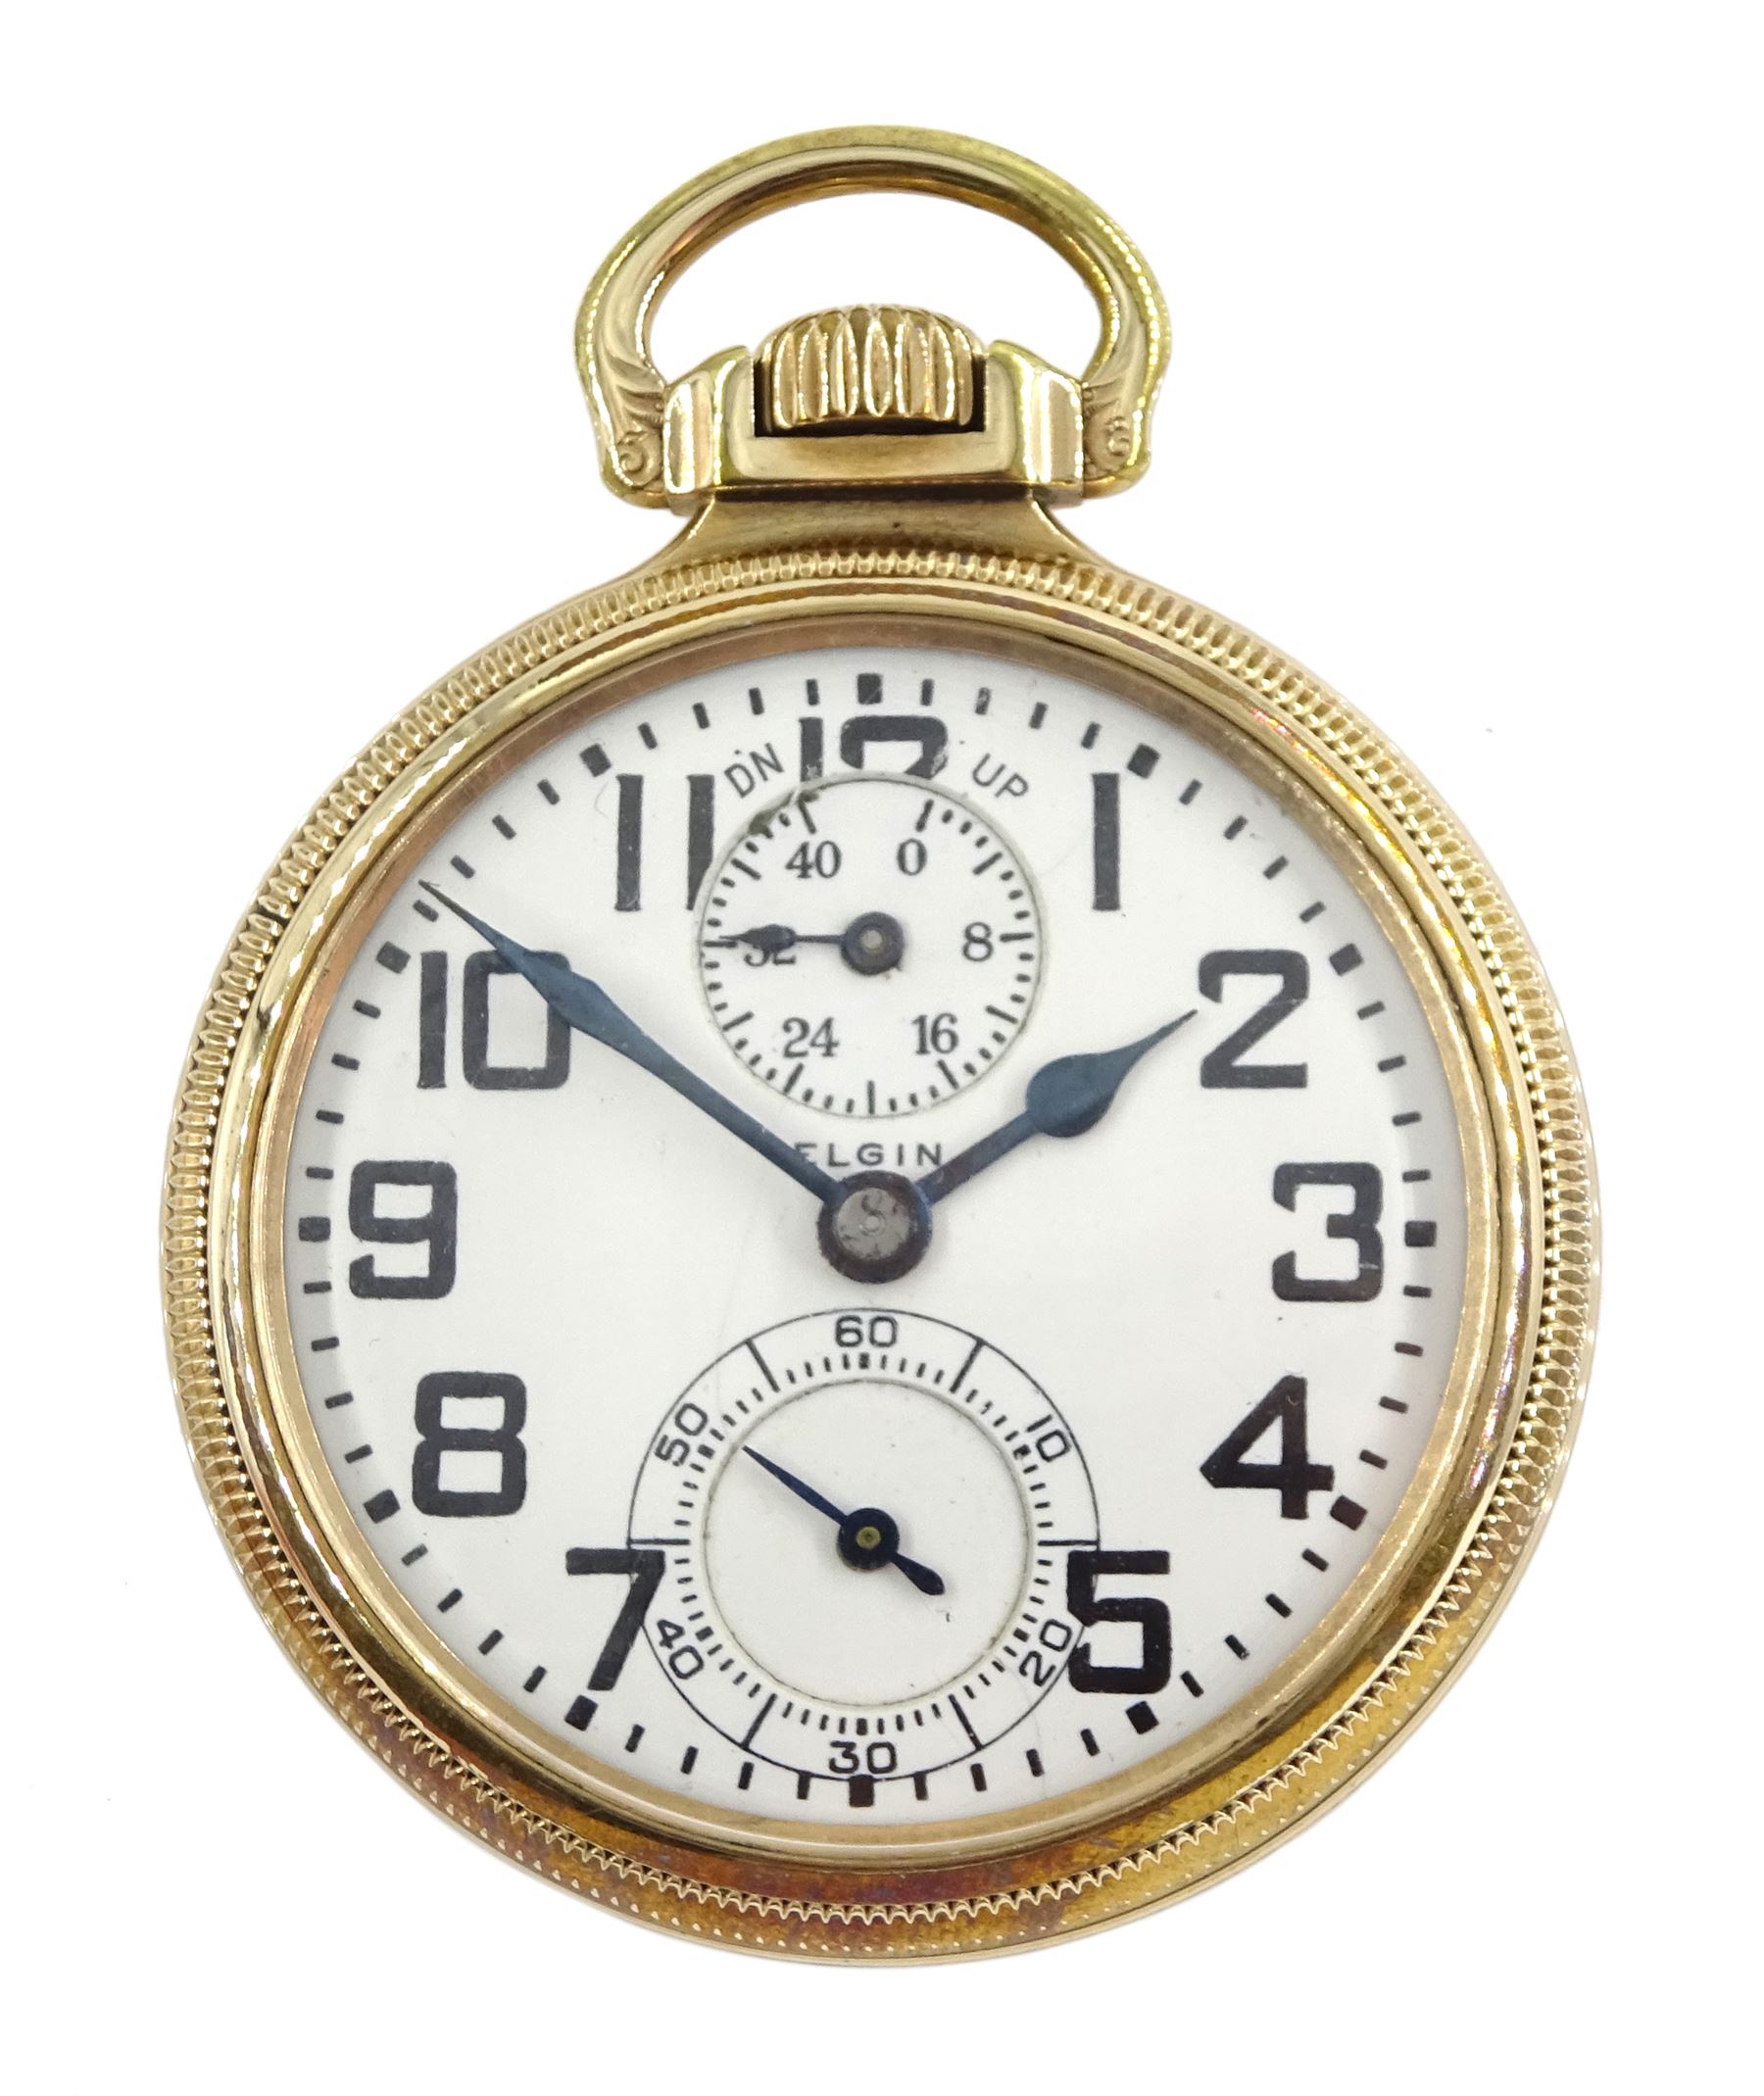 Elgin watch Co gold-plated open face B.W. Raymond 'up & down' keyless 21 jewels